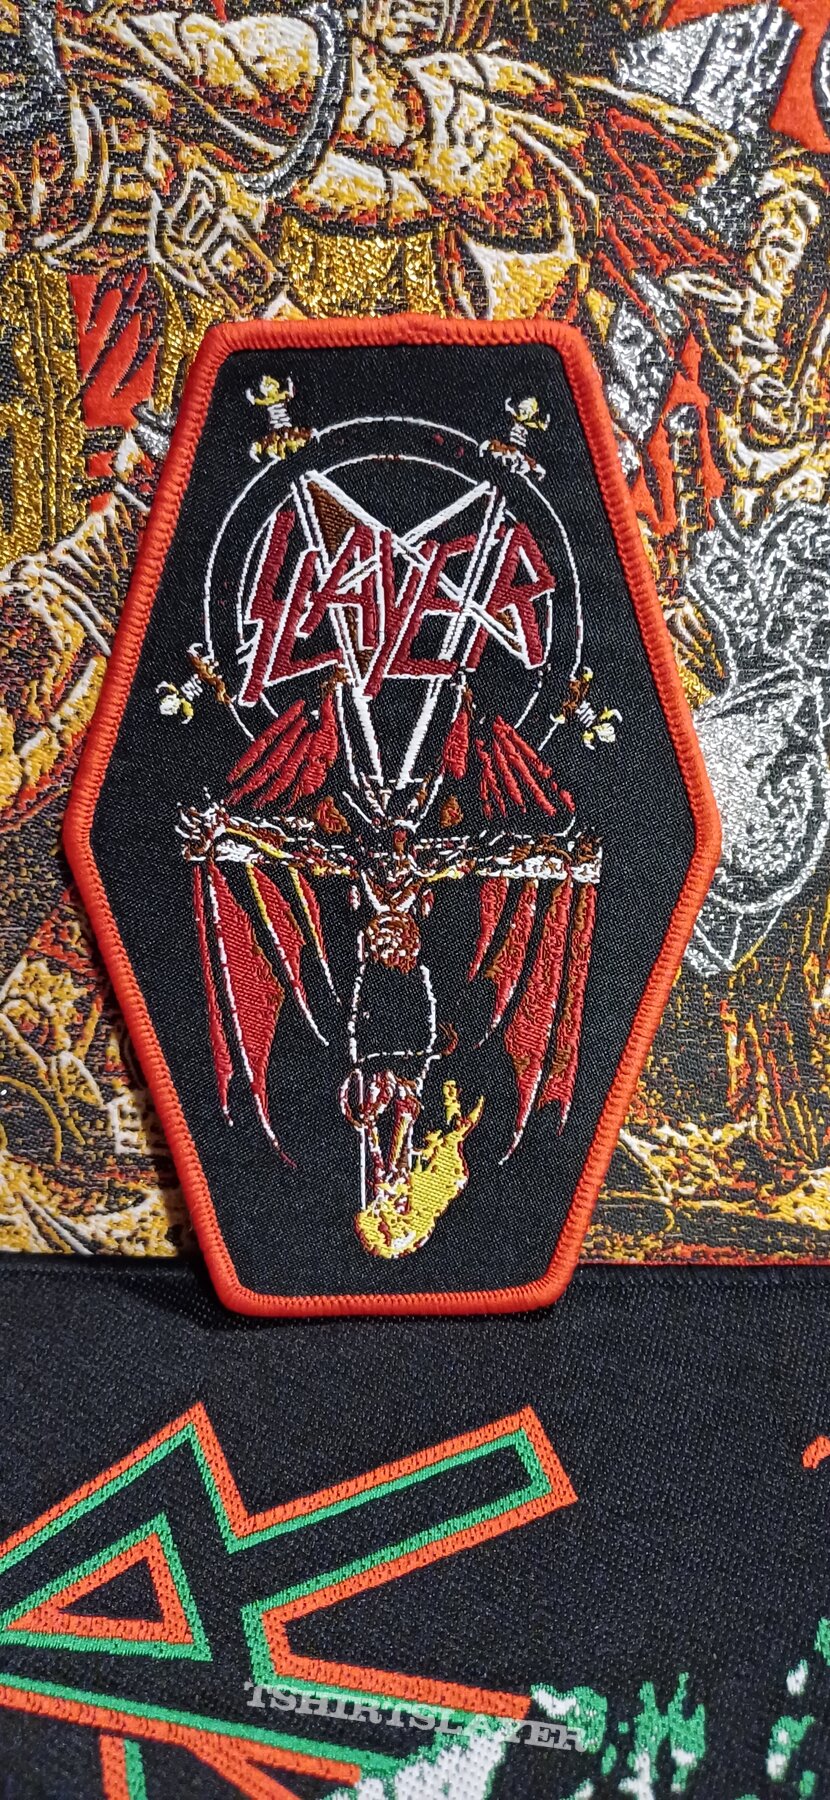 Slayer-crucified demon patch